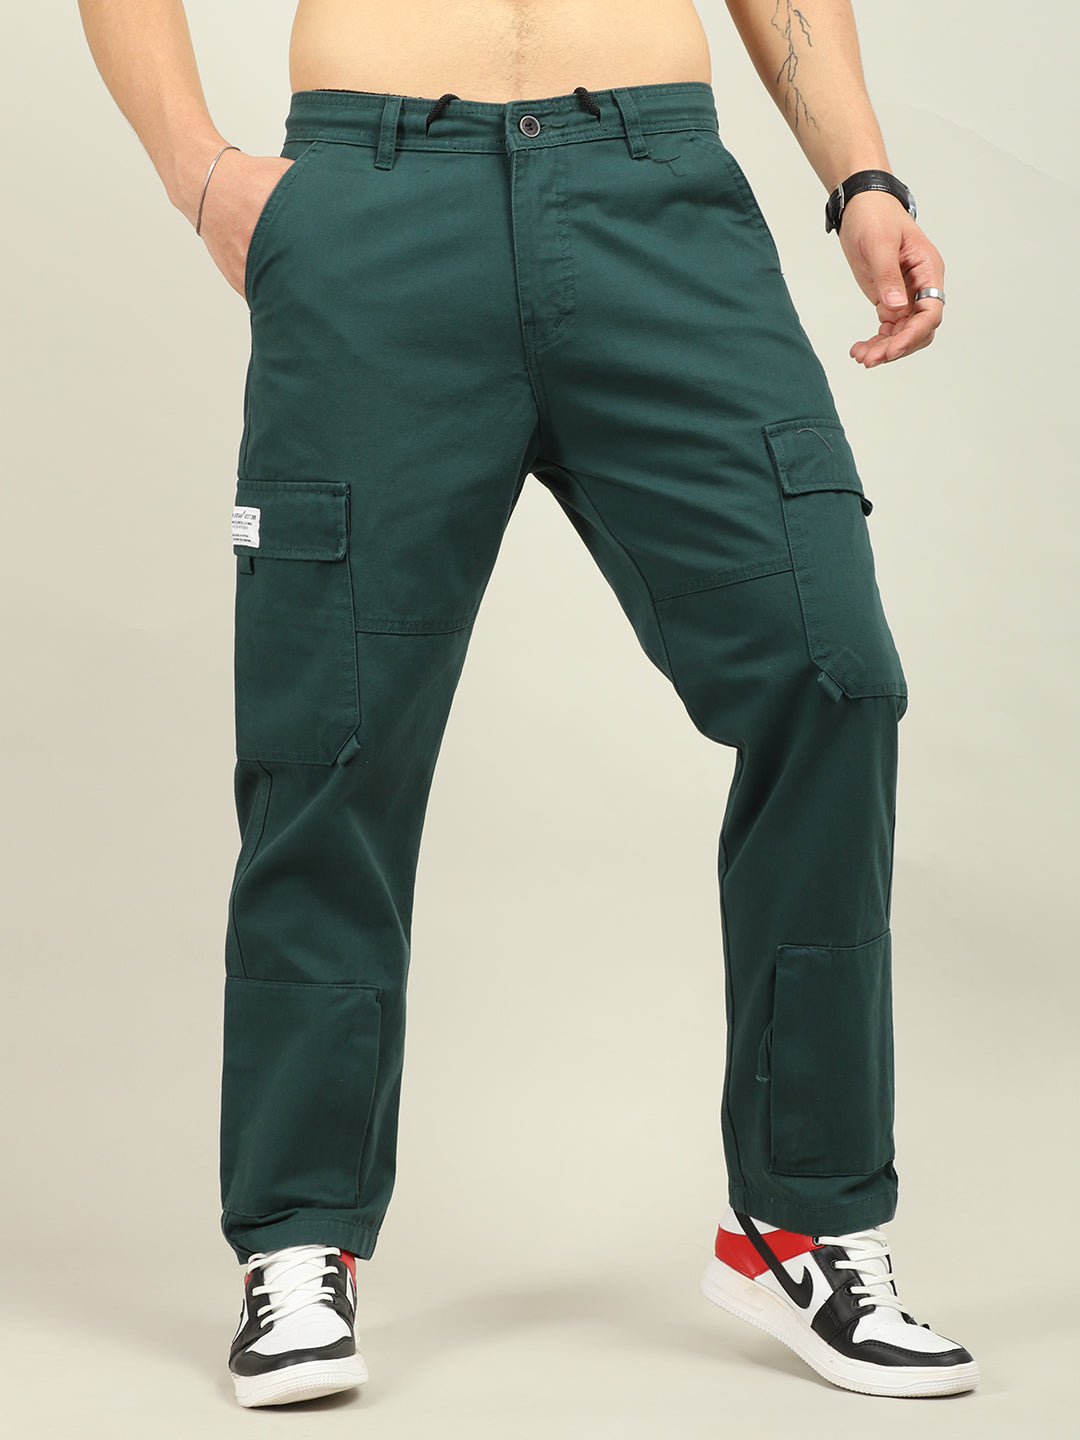 Drone Fantacy Royal Green Baggy Fit Cotton Cargo